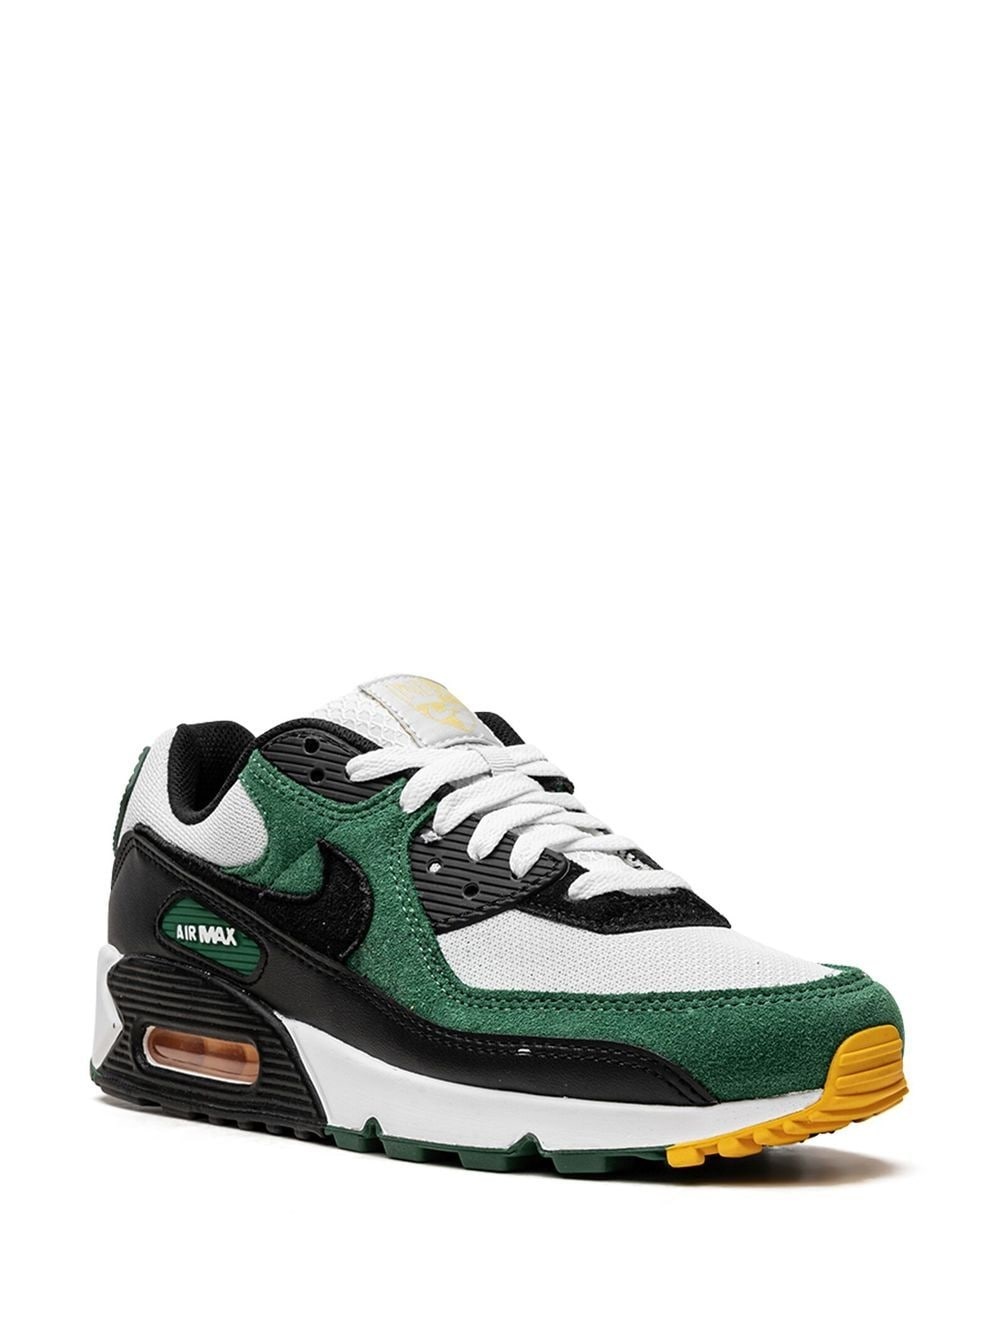 Air Max 90 ''Gorge Green'' sneakers - 2